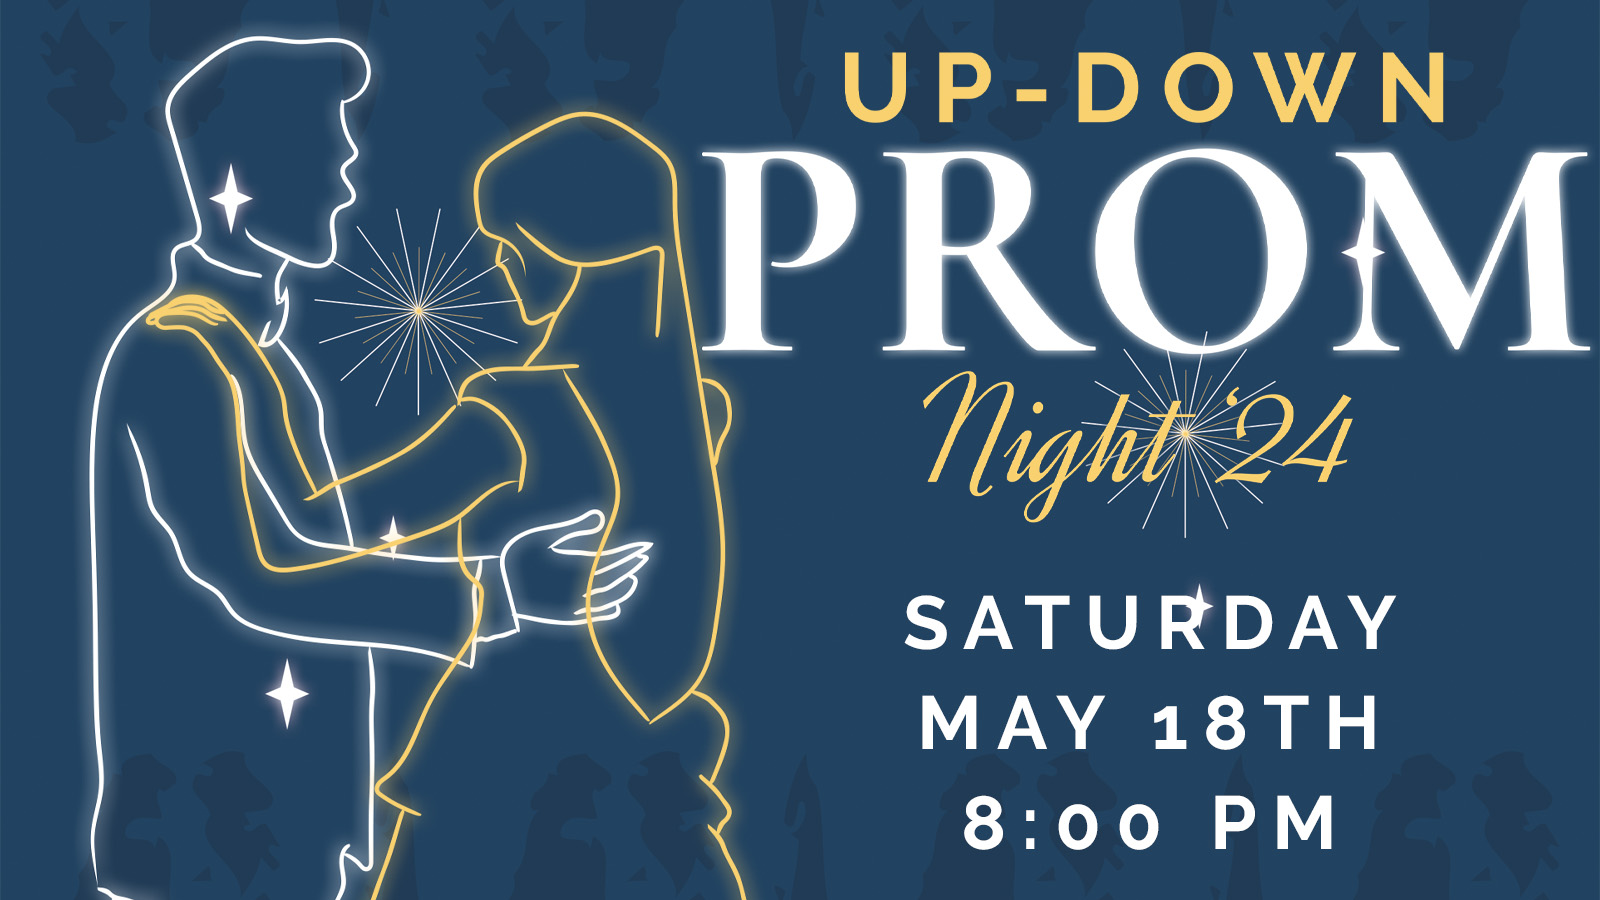 Prom Night at Up-Down